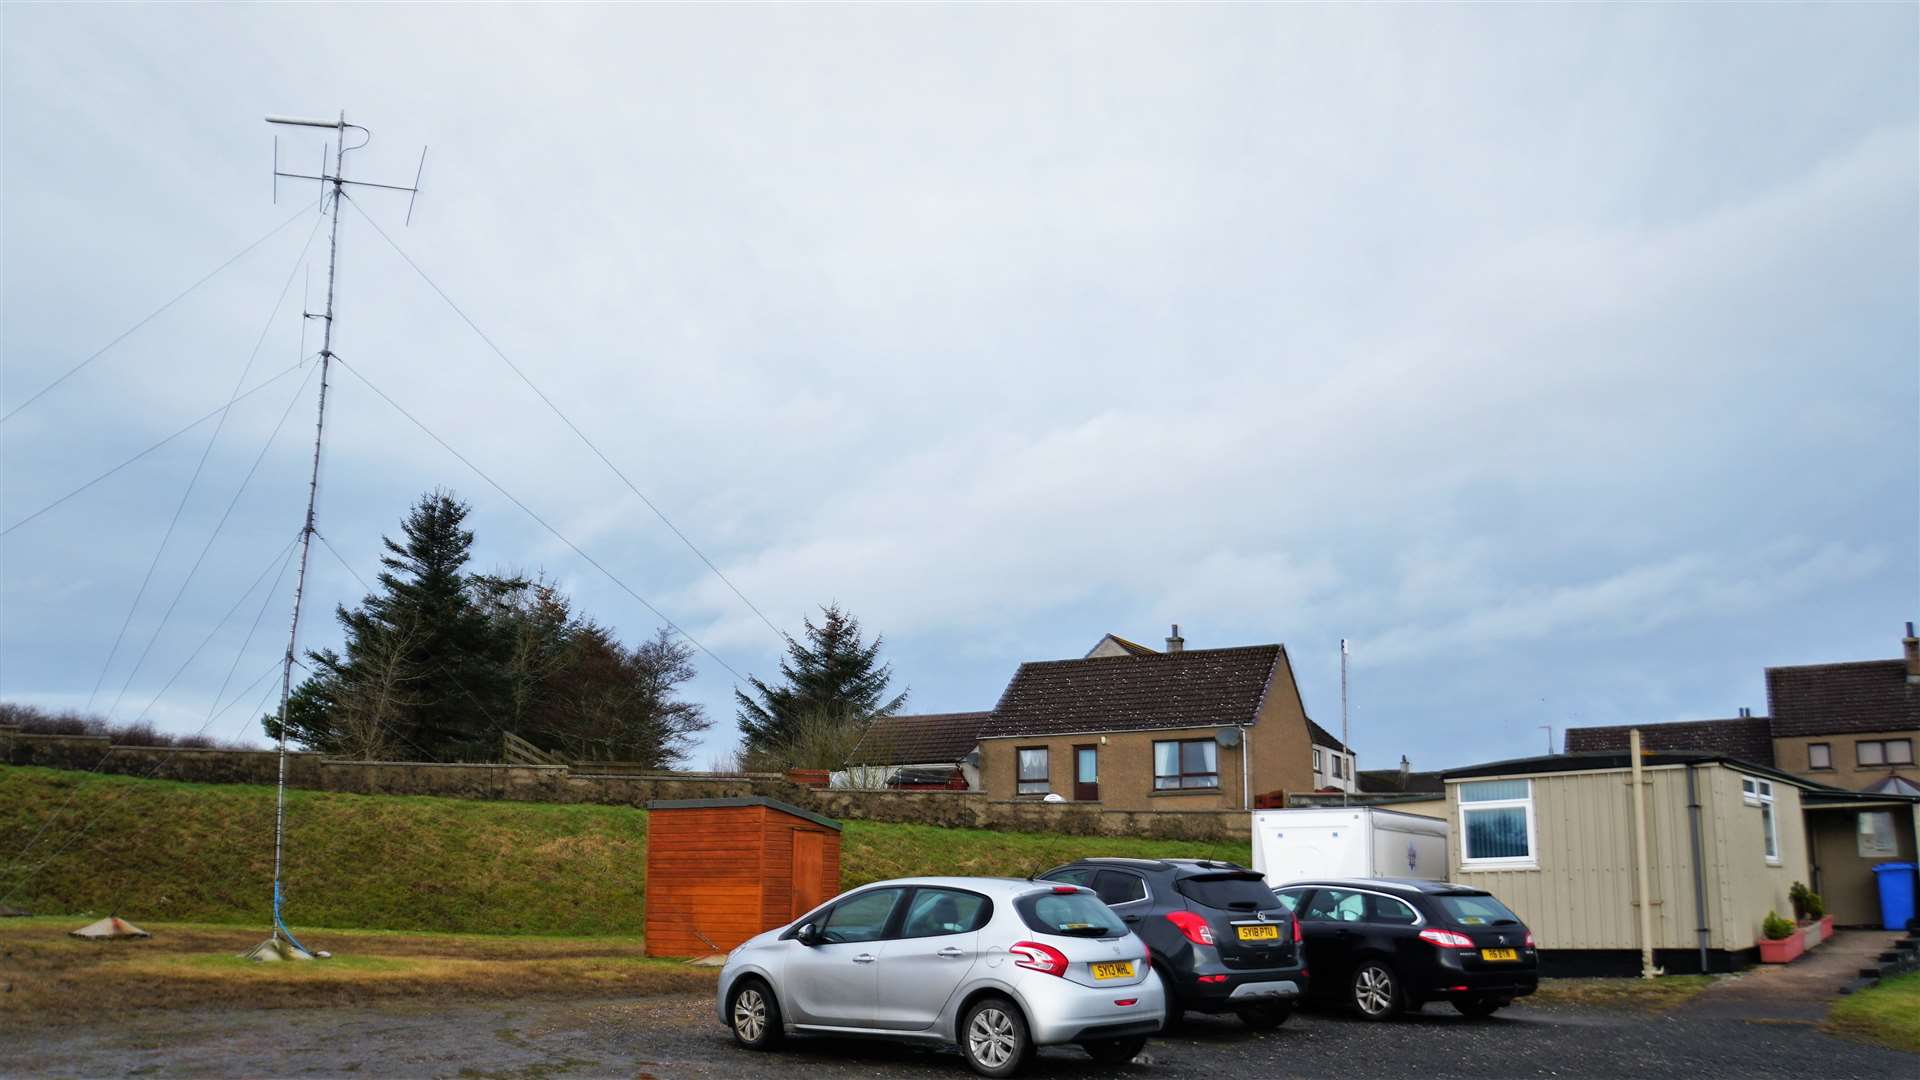 Caithness FM as it is today. The large transmitter on the left is no longer in use. Pictures: DGS